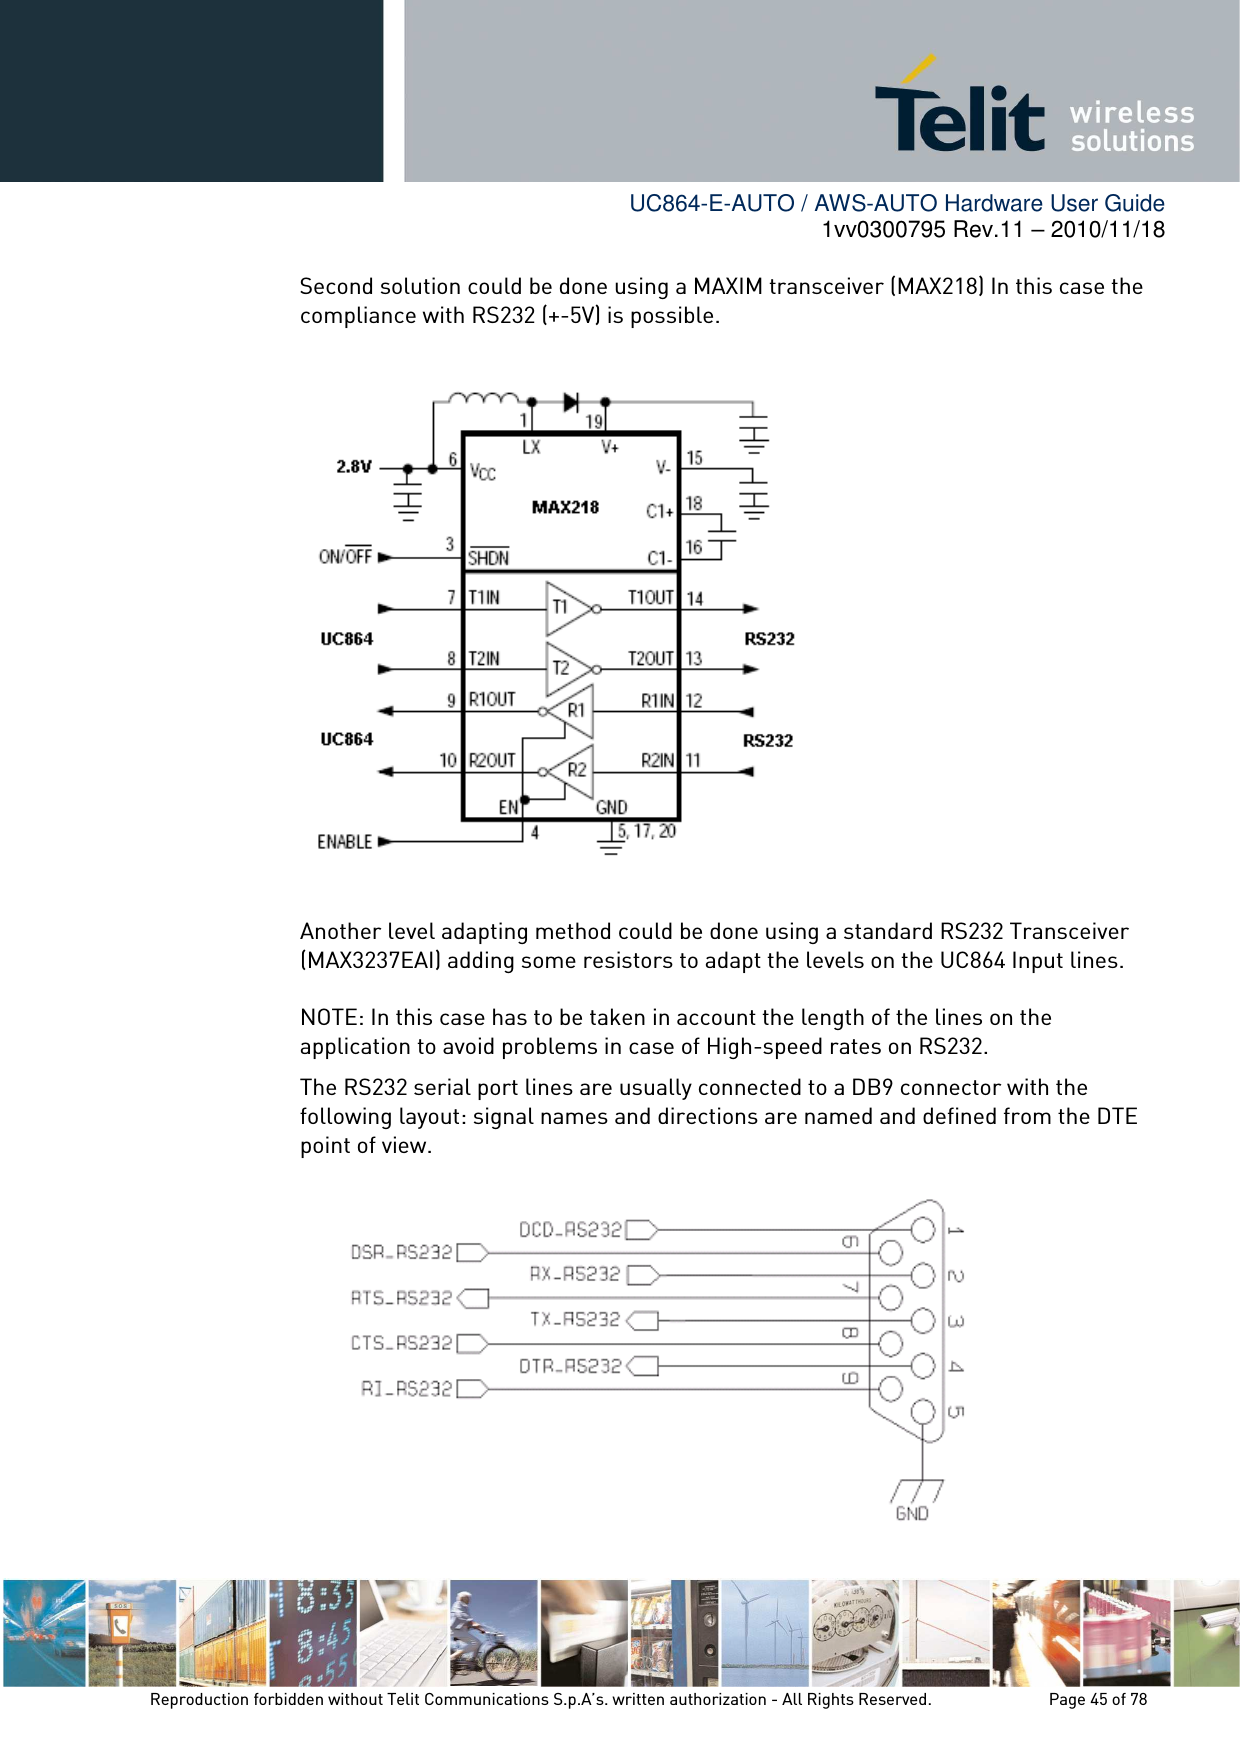        UC864-E-AUTO / AWS-AUTO Hardware User Guide 1vv0300795 Rev.11 – 2010/11/18     Reproduction forbidden without Telit Communications S.p.A’s. written authorization - All Rights Reserved.    Page 45 of 78      Second solution could be done using a MAXIM transceiver (MAX218) In this case the compliance with RS232 (+-5V) is possible.    Another level adapting method could be done using a standard RS232 Transceiver (MAX3237EAI) adding some resistors to adapt the levels on the UC864 Input lines.  NOTE: In this case has to be taken in account the length of the lines on the application to avoid problems in case of High-speed rates on RS232. The RS232 serial port lines are usually connected to a DB9 connector with the following layout: signal names and directions are named and defined from the DTE point of view.  